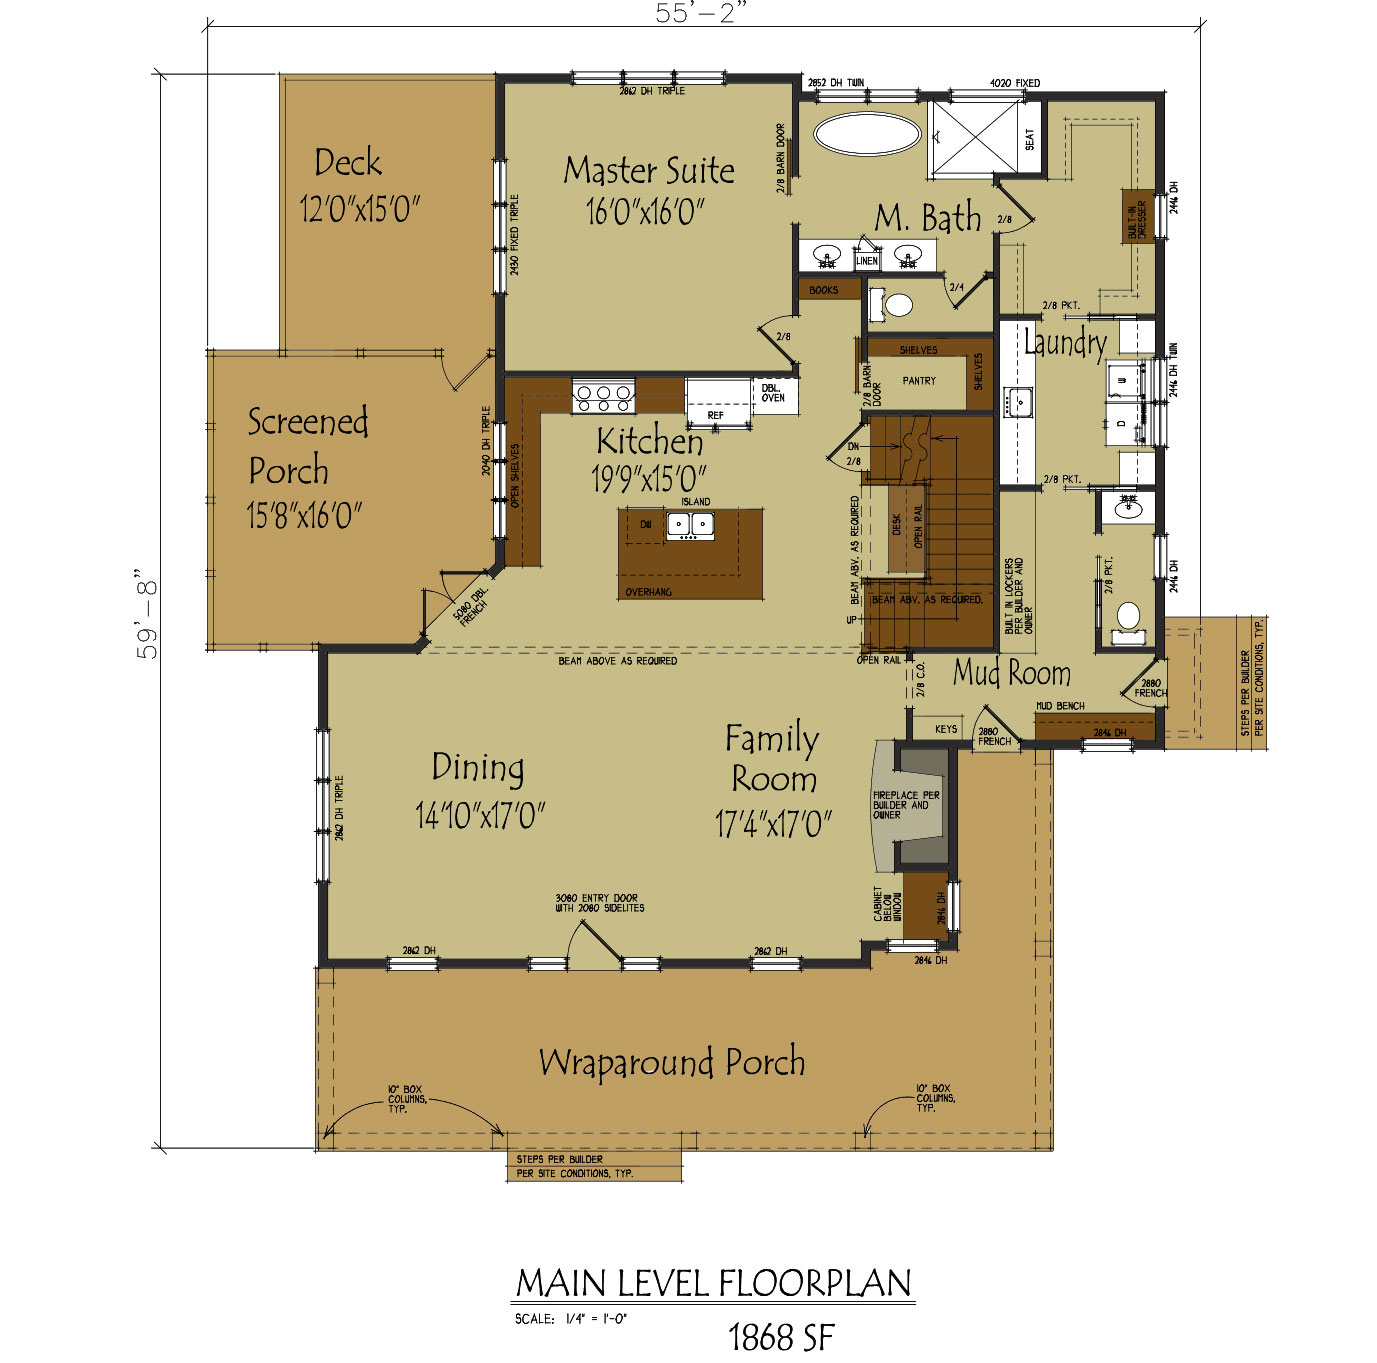 Modern Farmhouse Floor Plan With, Old House Plans With Wrap Around Porch